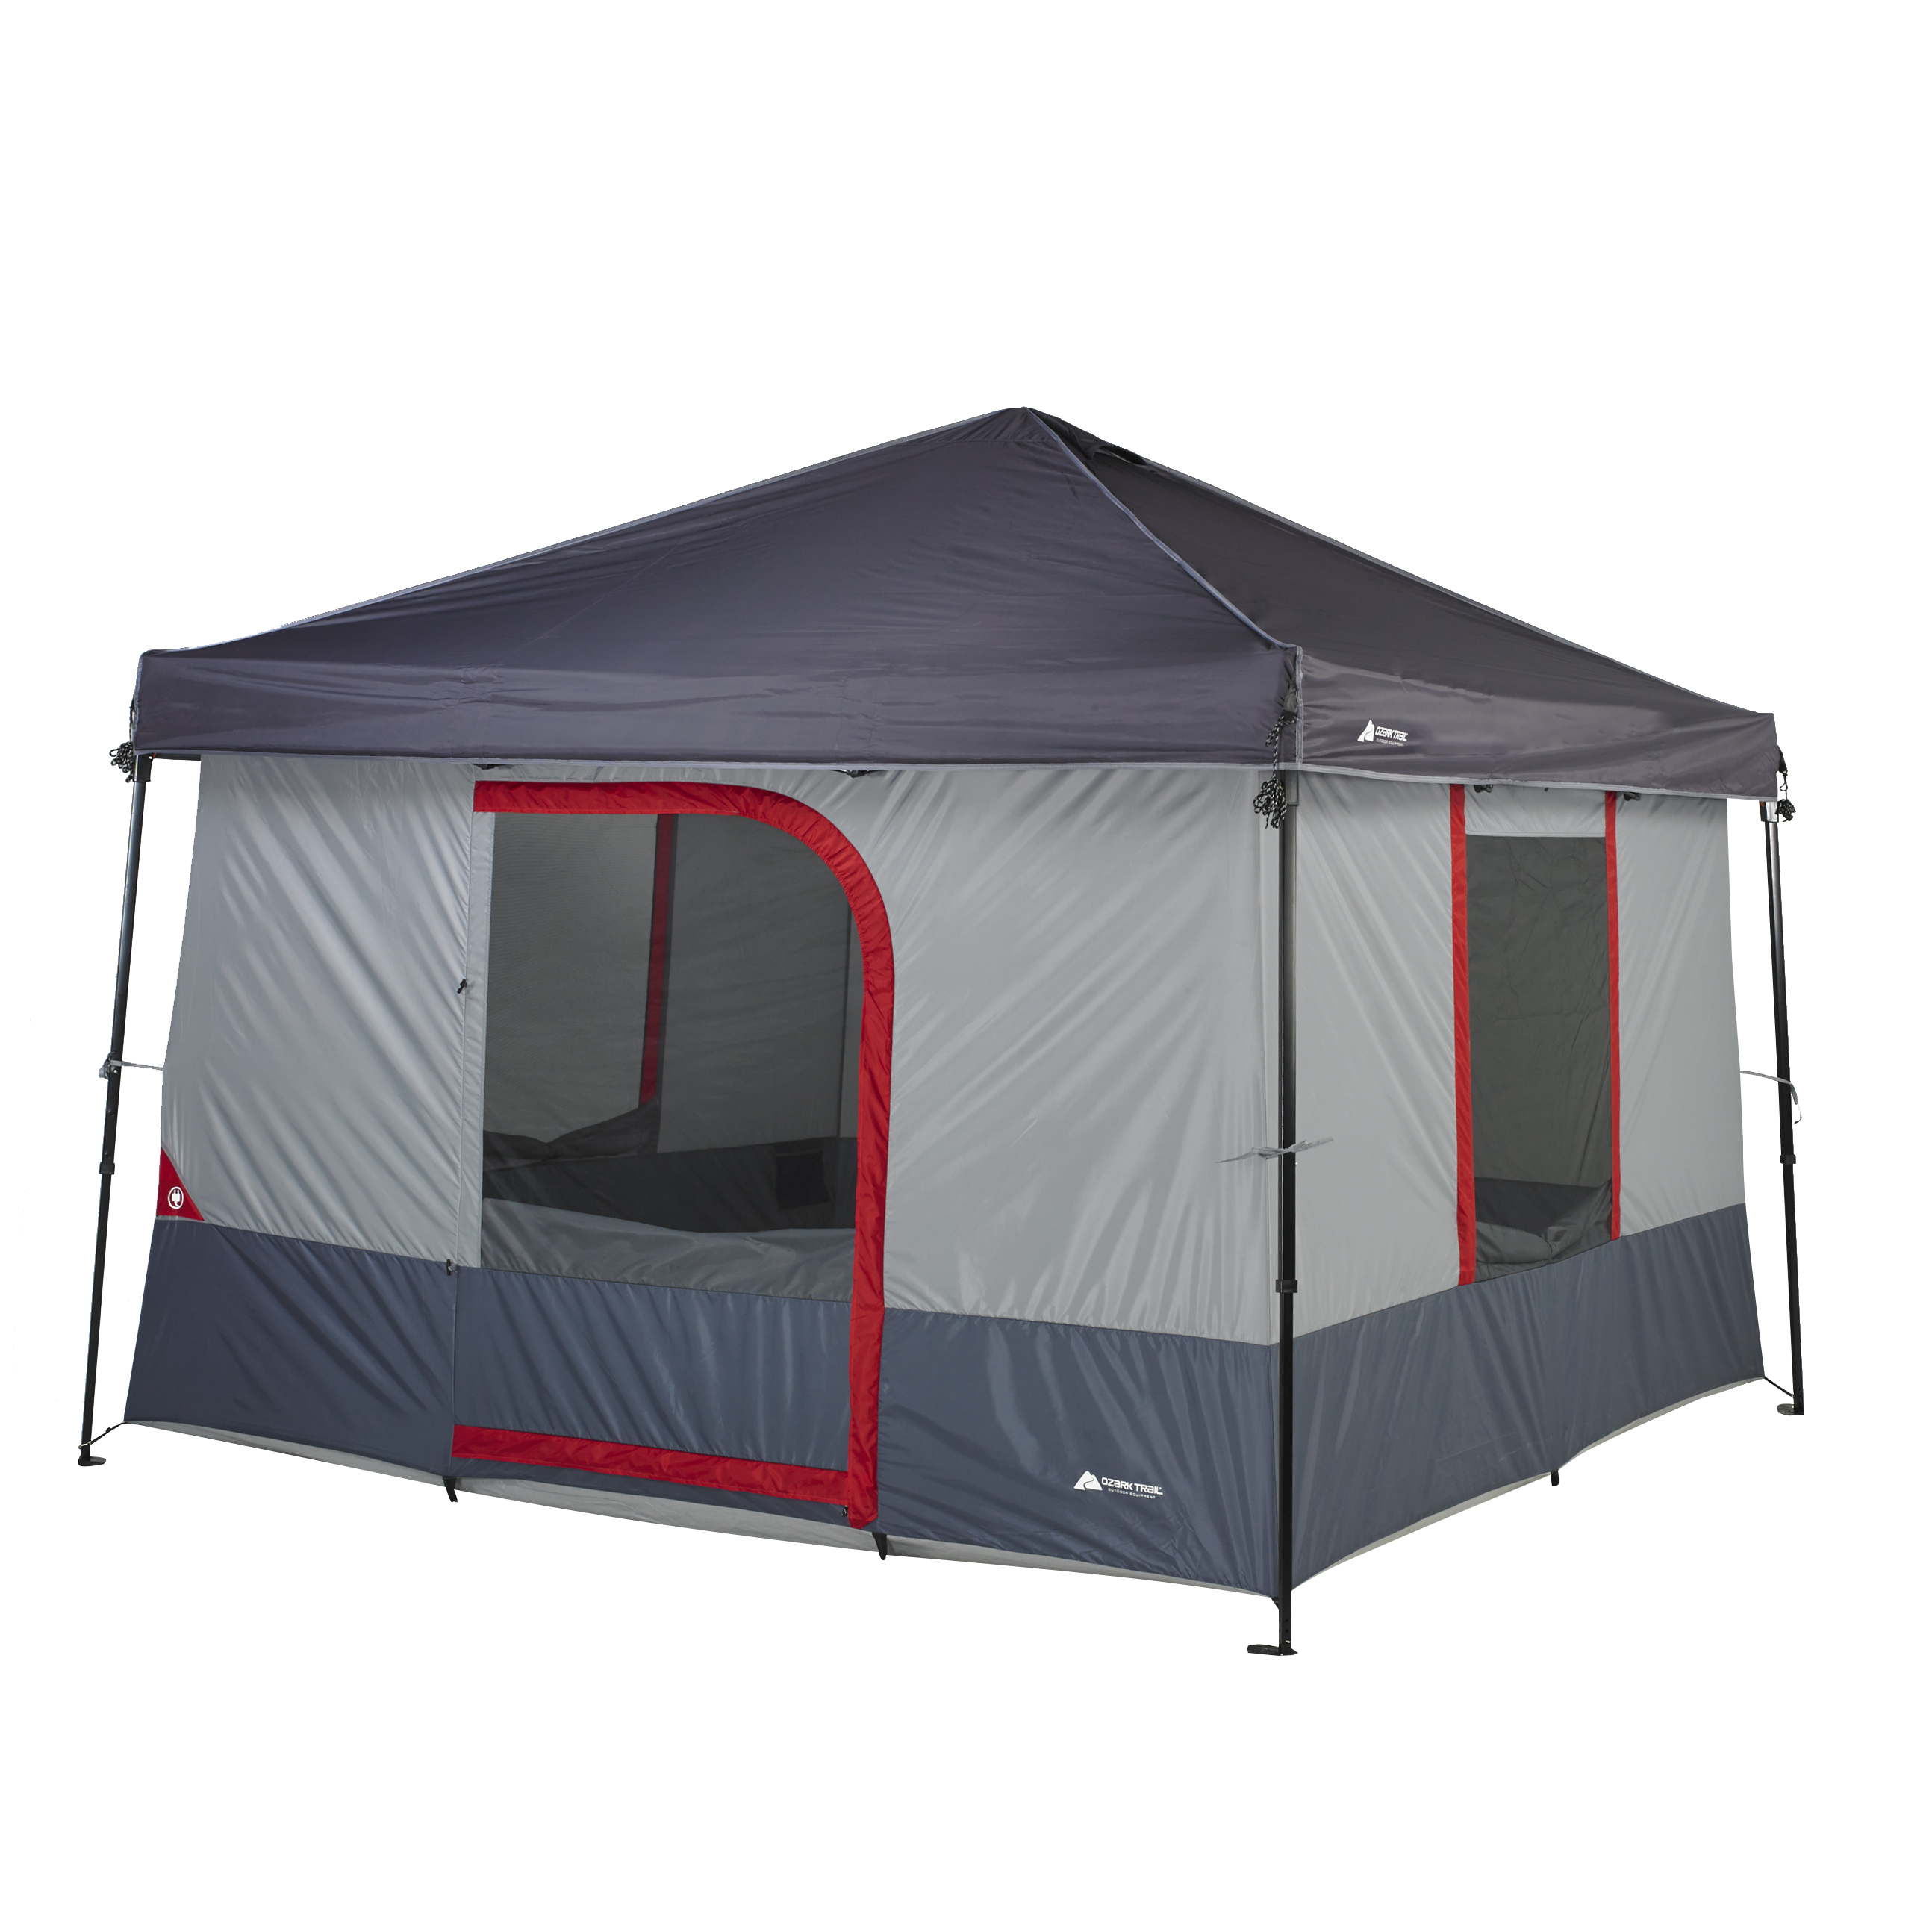 Ozark Trail ConnecTent 6-Person Canopy Tent, Straight-Leg Canopy Sold Separately - image 1 of 9